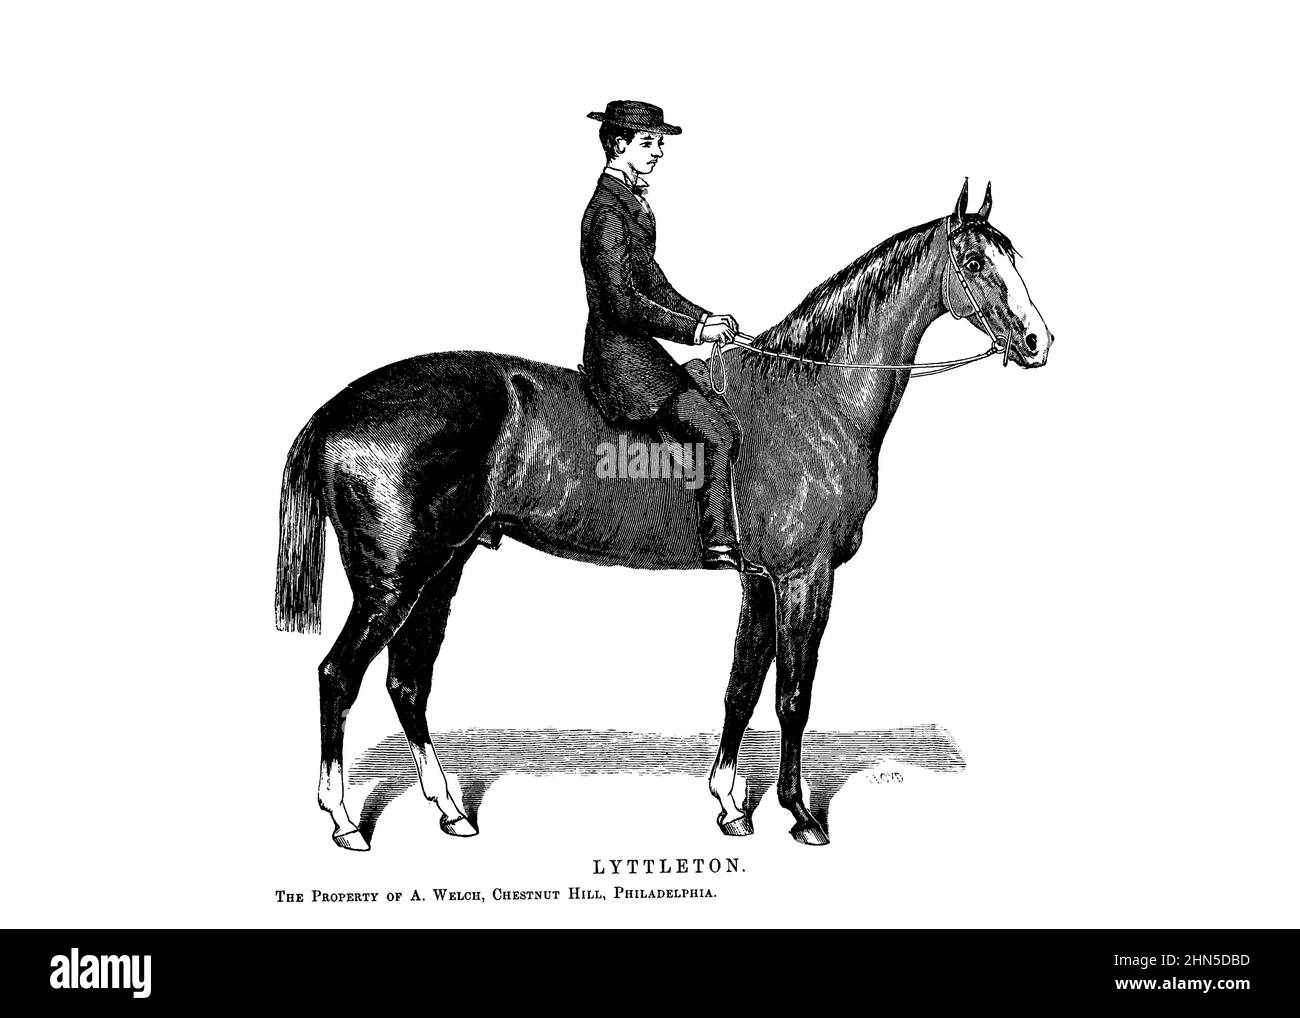 Lyttleton Drawn by C. Lloyd From the book ' Famous American race horses ' published in 1877 by Porter and Coates Philadelphia, Stock Photo